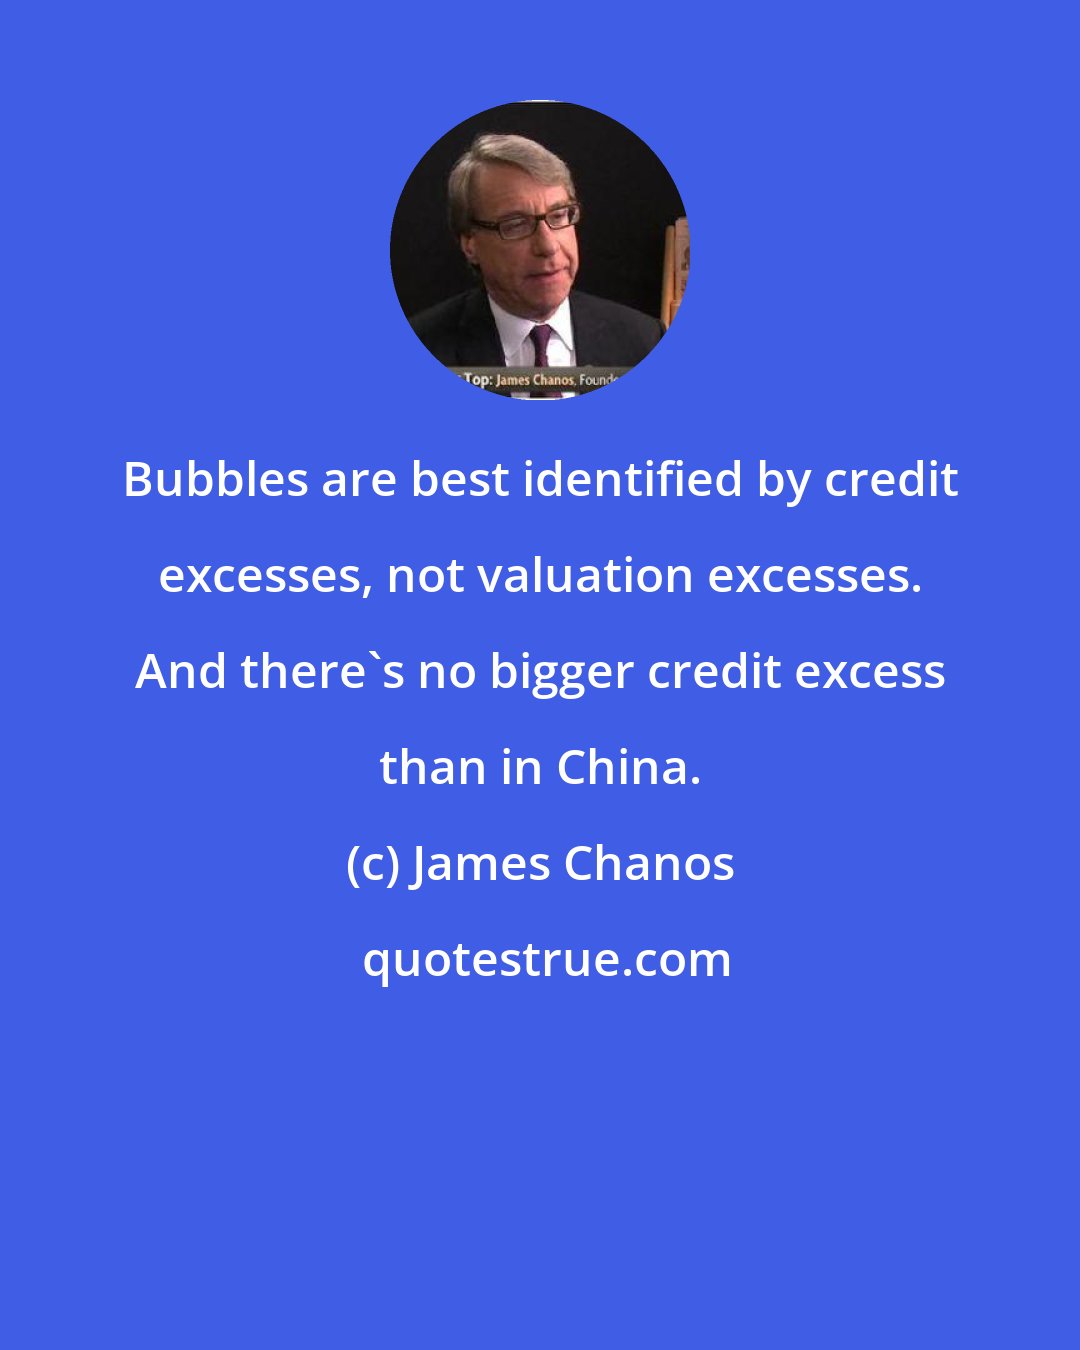 James Chanos: Bubbles are best identified by credit excesses, not valuation excesses. And there's no bigger credit excess than in China.